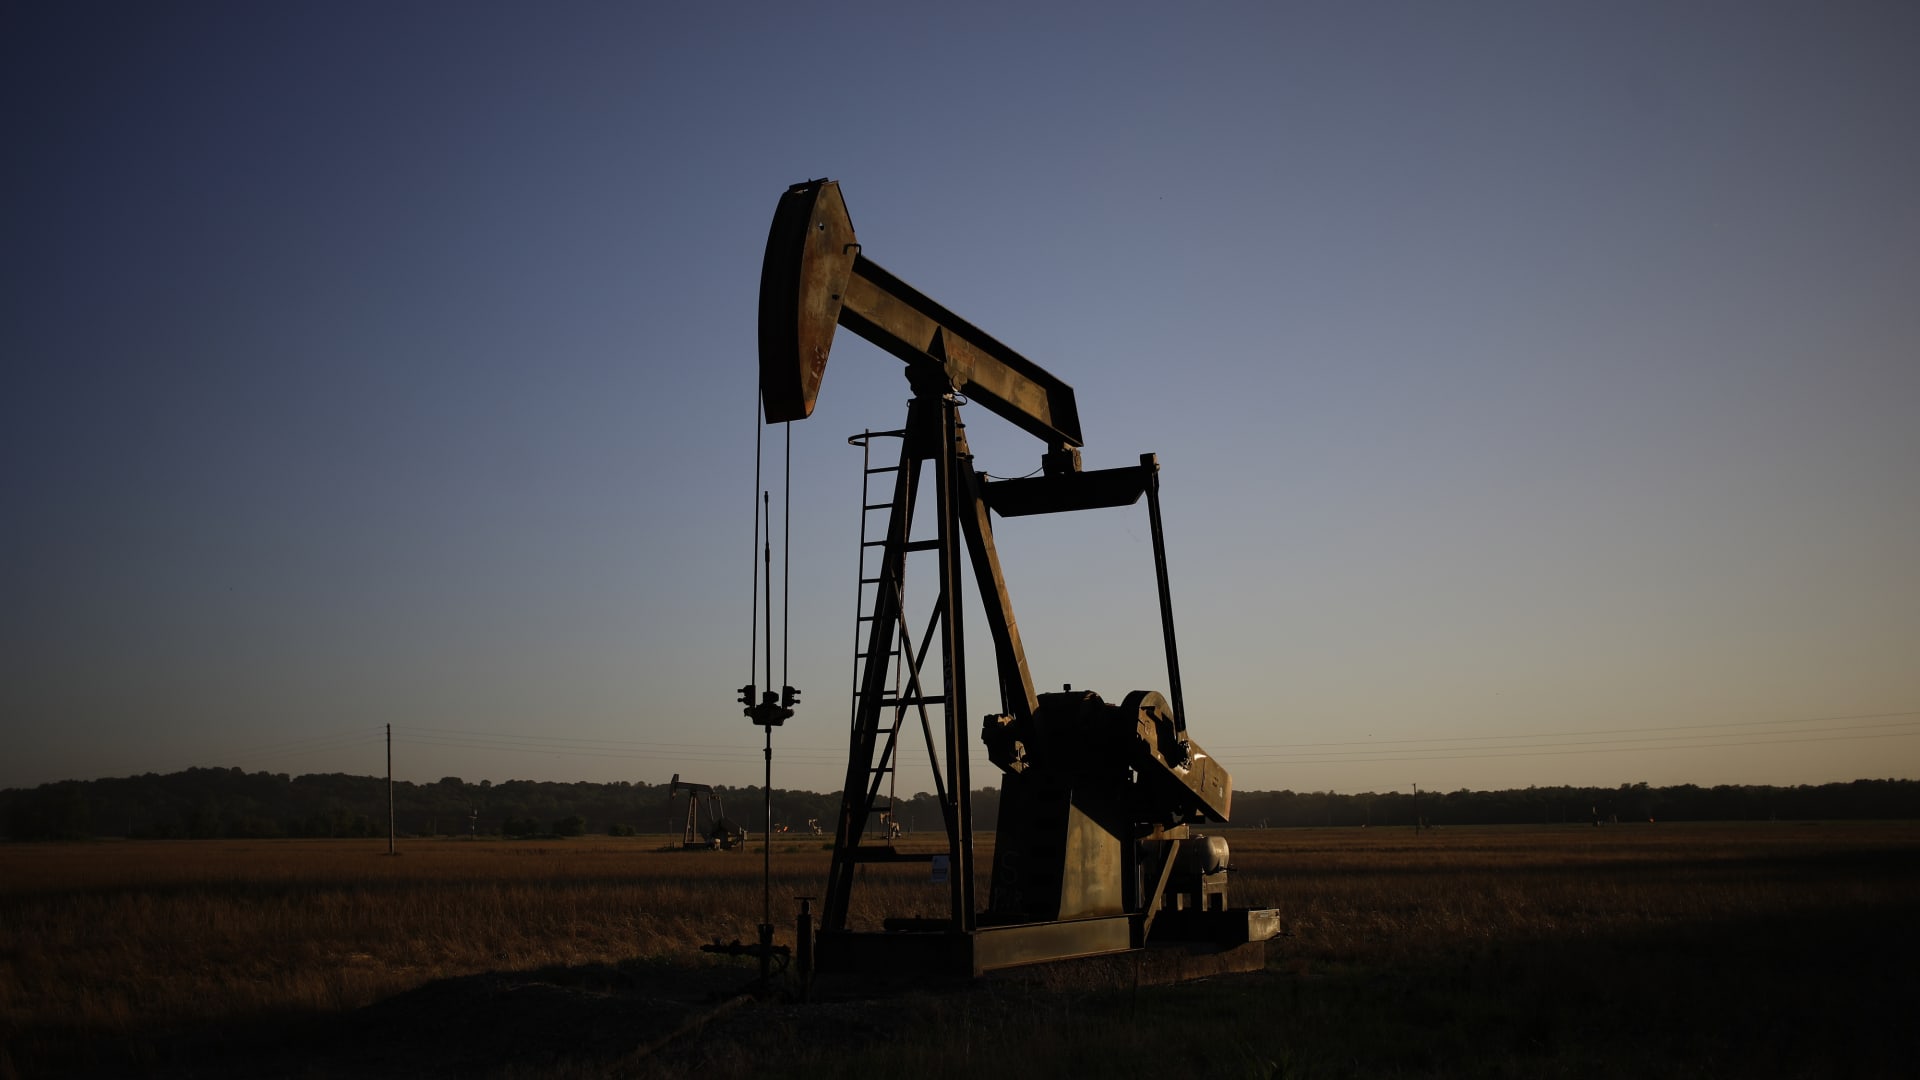 Fund manager says oil is in a multi-year bull market – and names 3 stocks to cash in